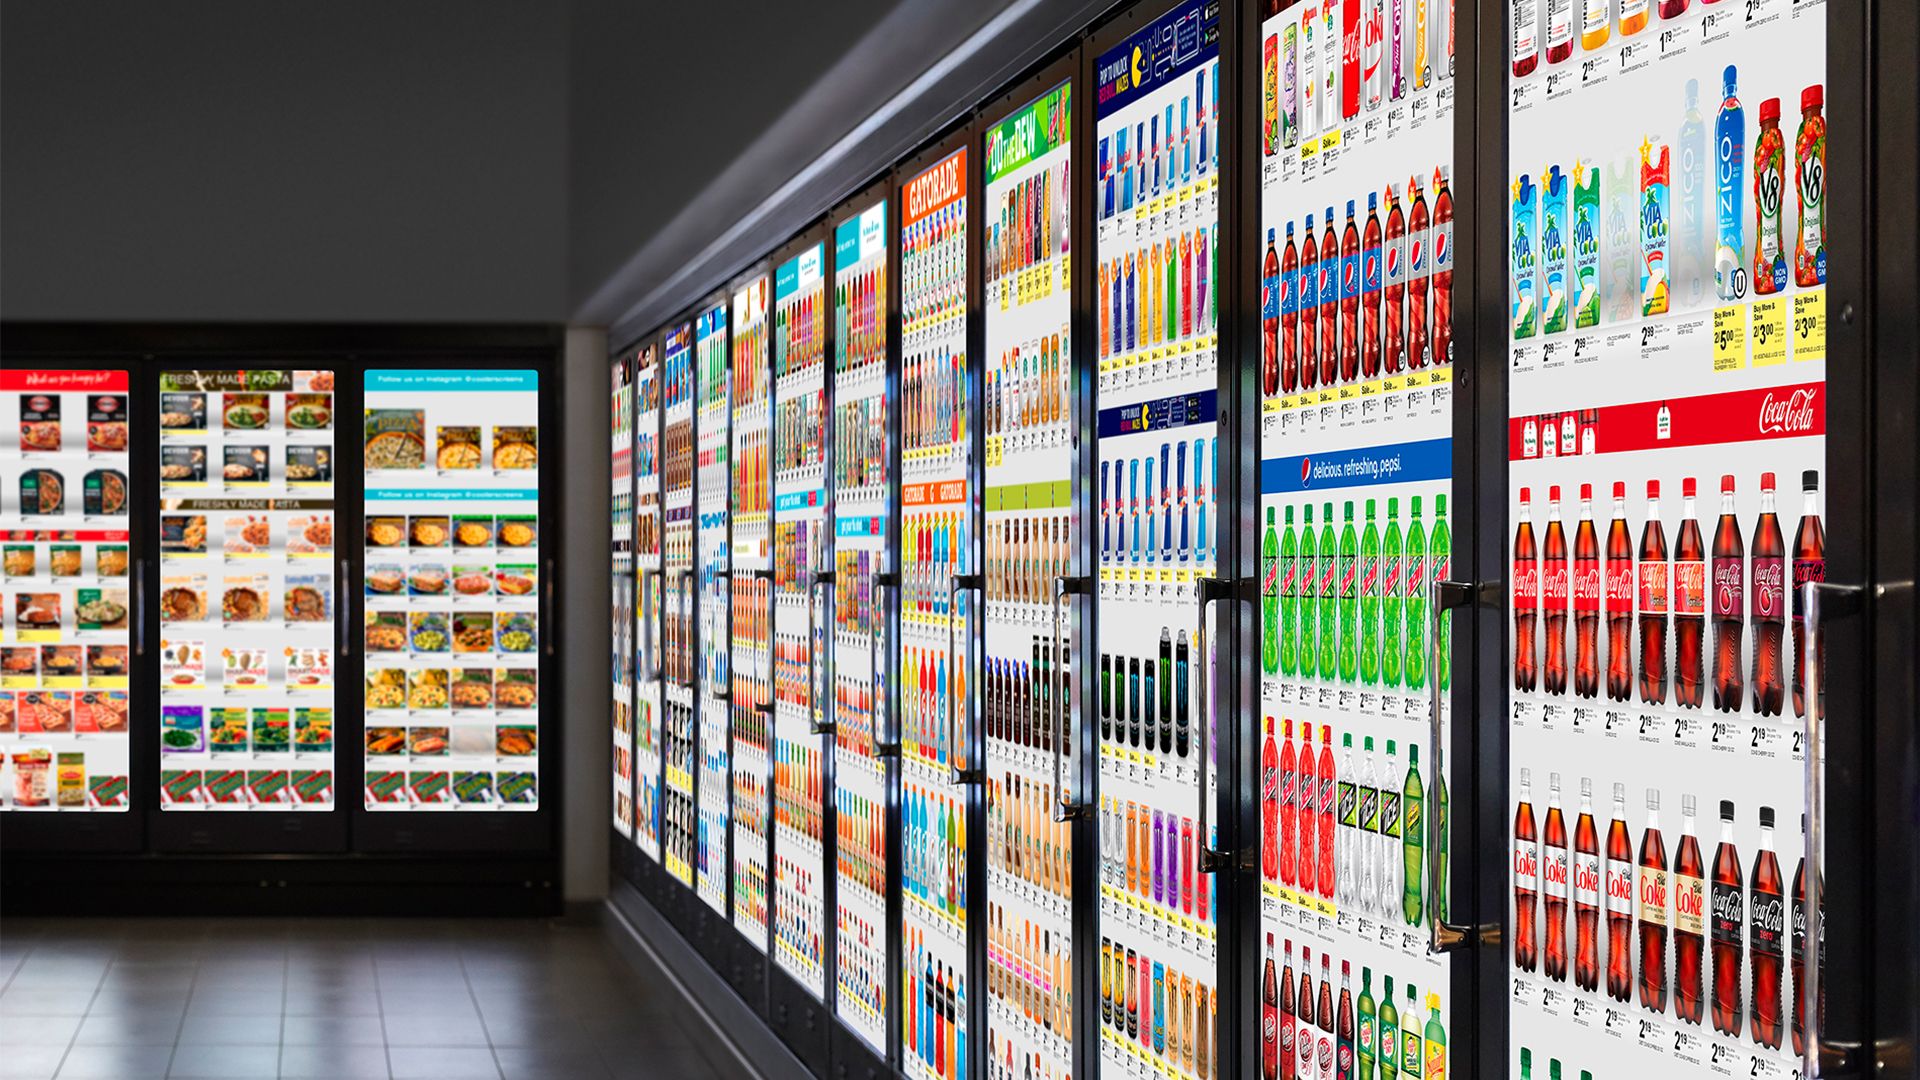 Image of Cooler Screens' digital representation of the products in a store's refrigerated section